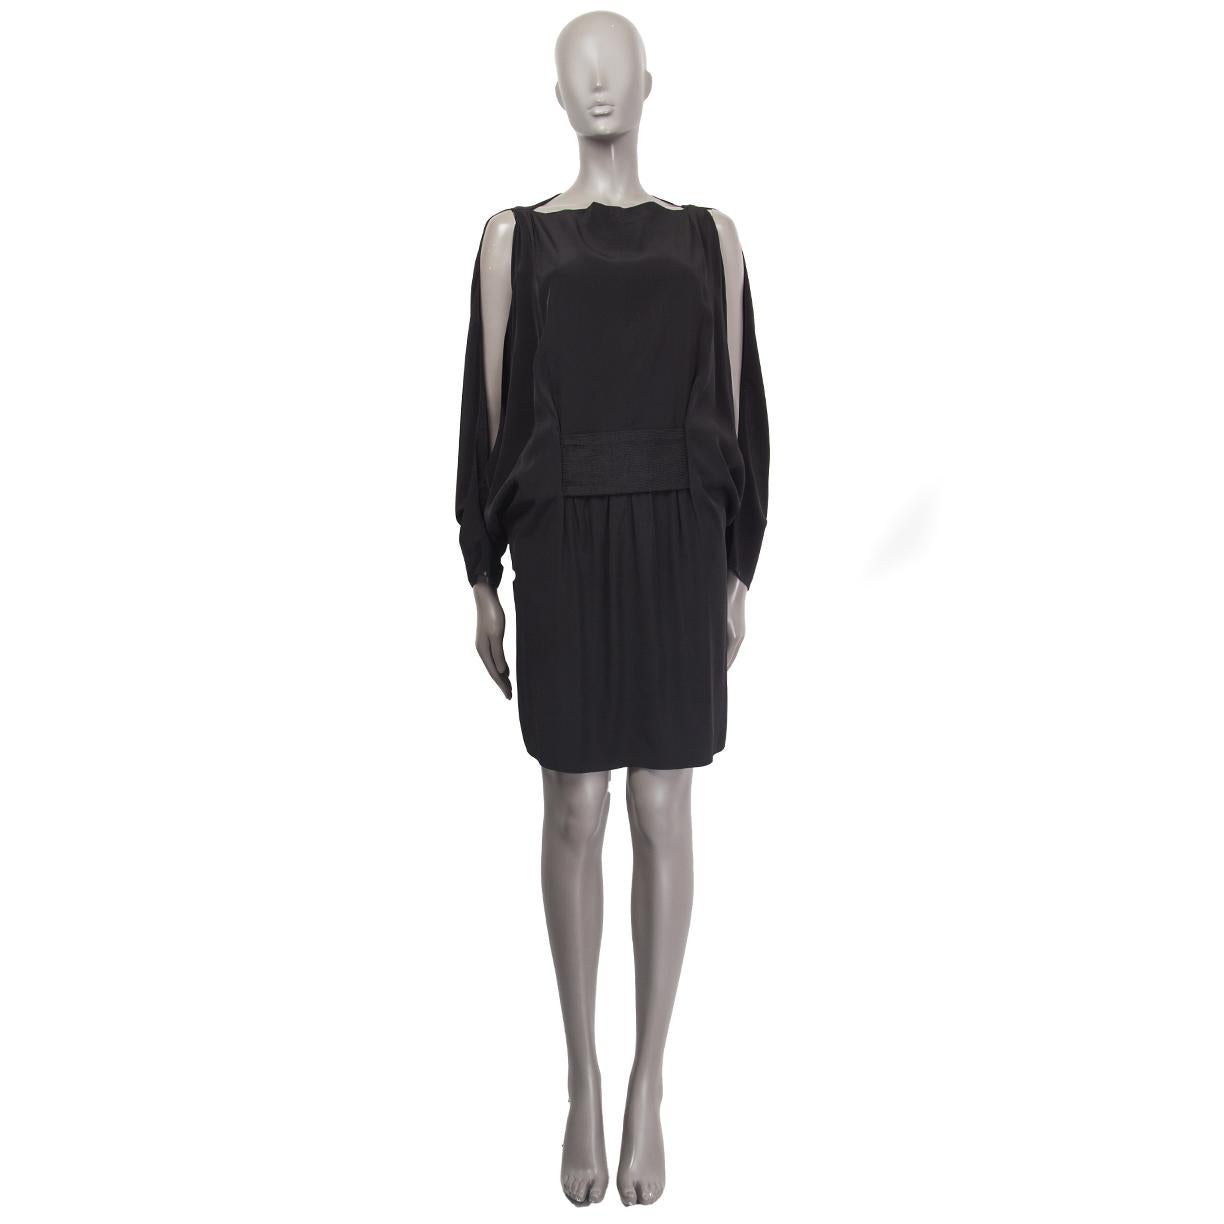 100% authentic Balenciaga cold shoulder cocktail dress in black acetate (85%) and silk (15%) with rib waist detail. Has batwing sleeves (sleeve measurement taken from the neck. Loose fit. Has been worn and is in excellent